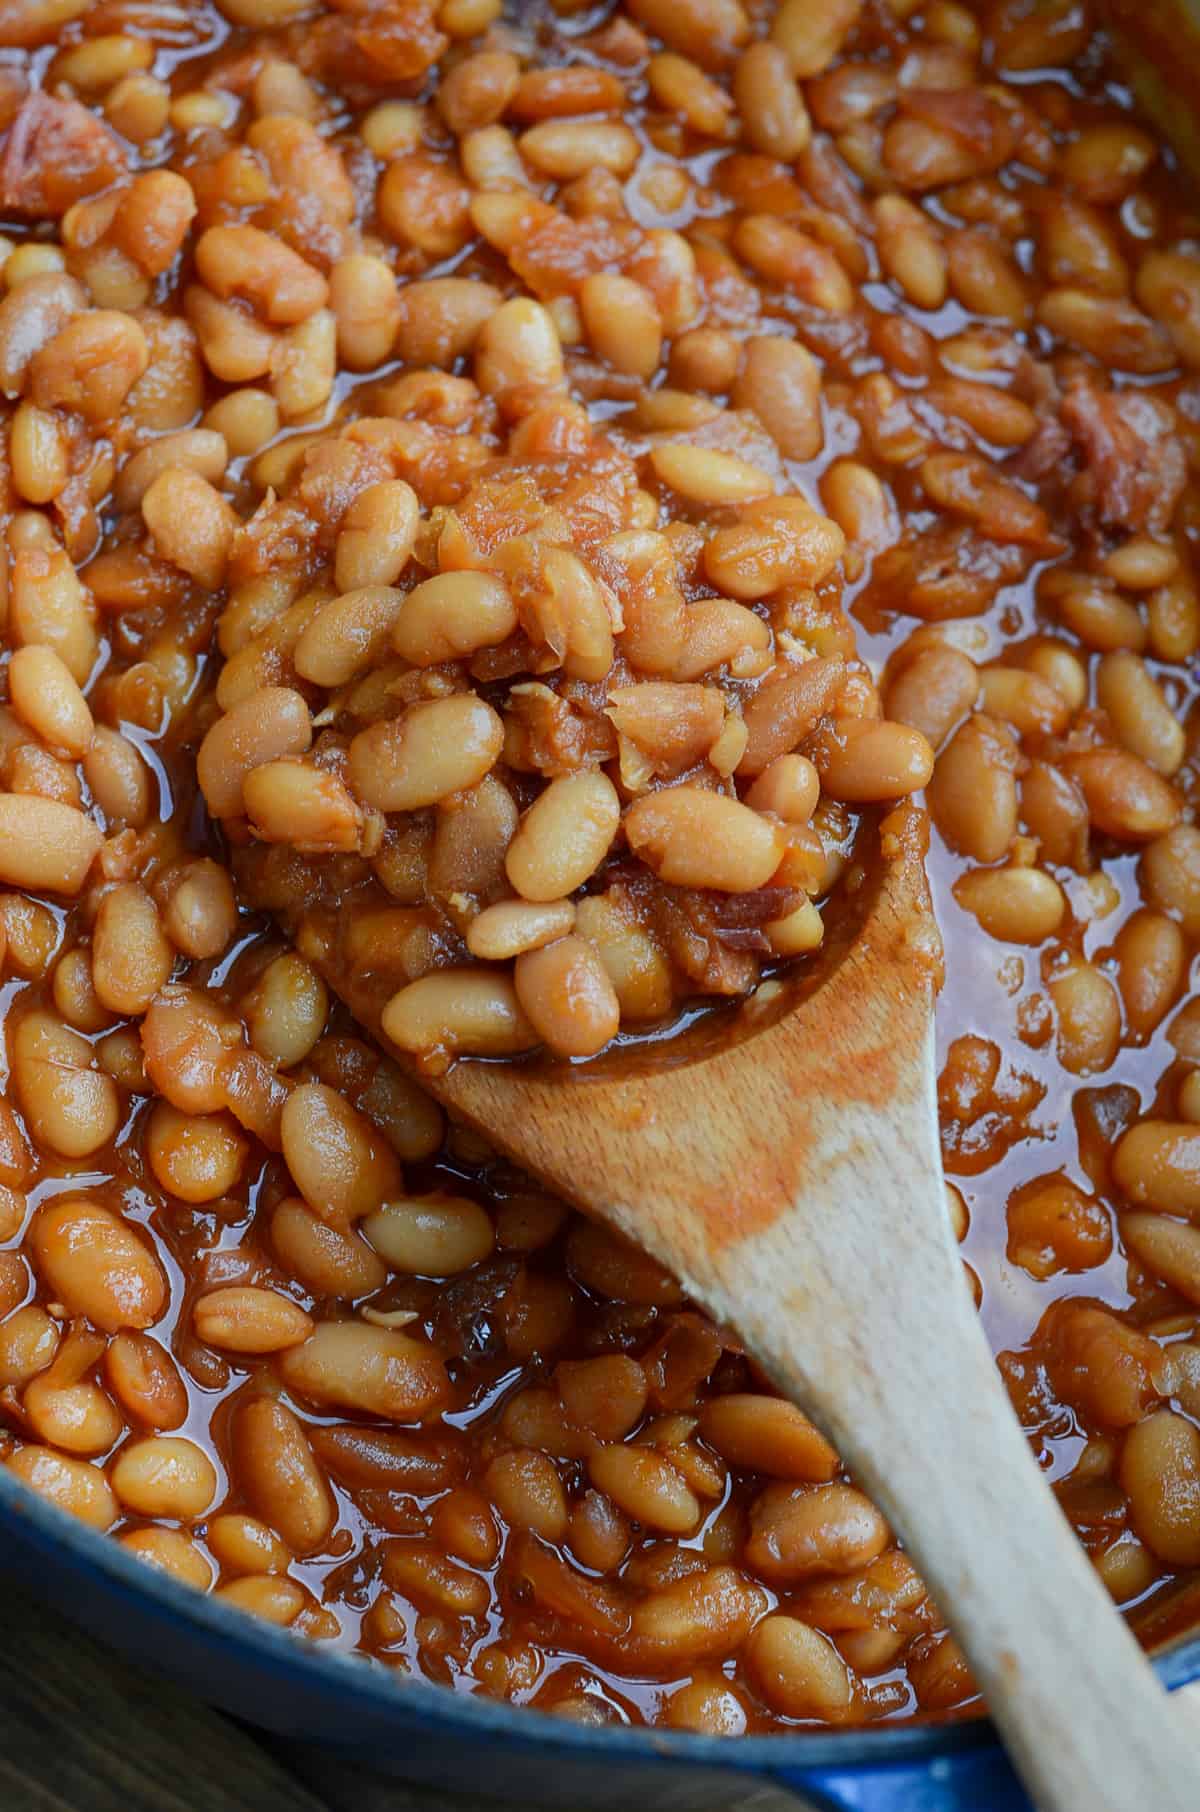 A close up of a wooden spoon scooping baked beans from a pot.